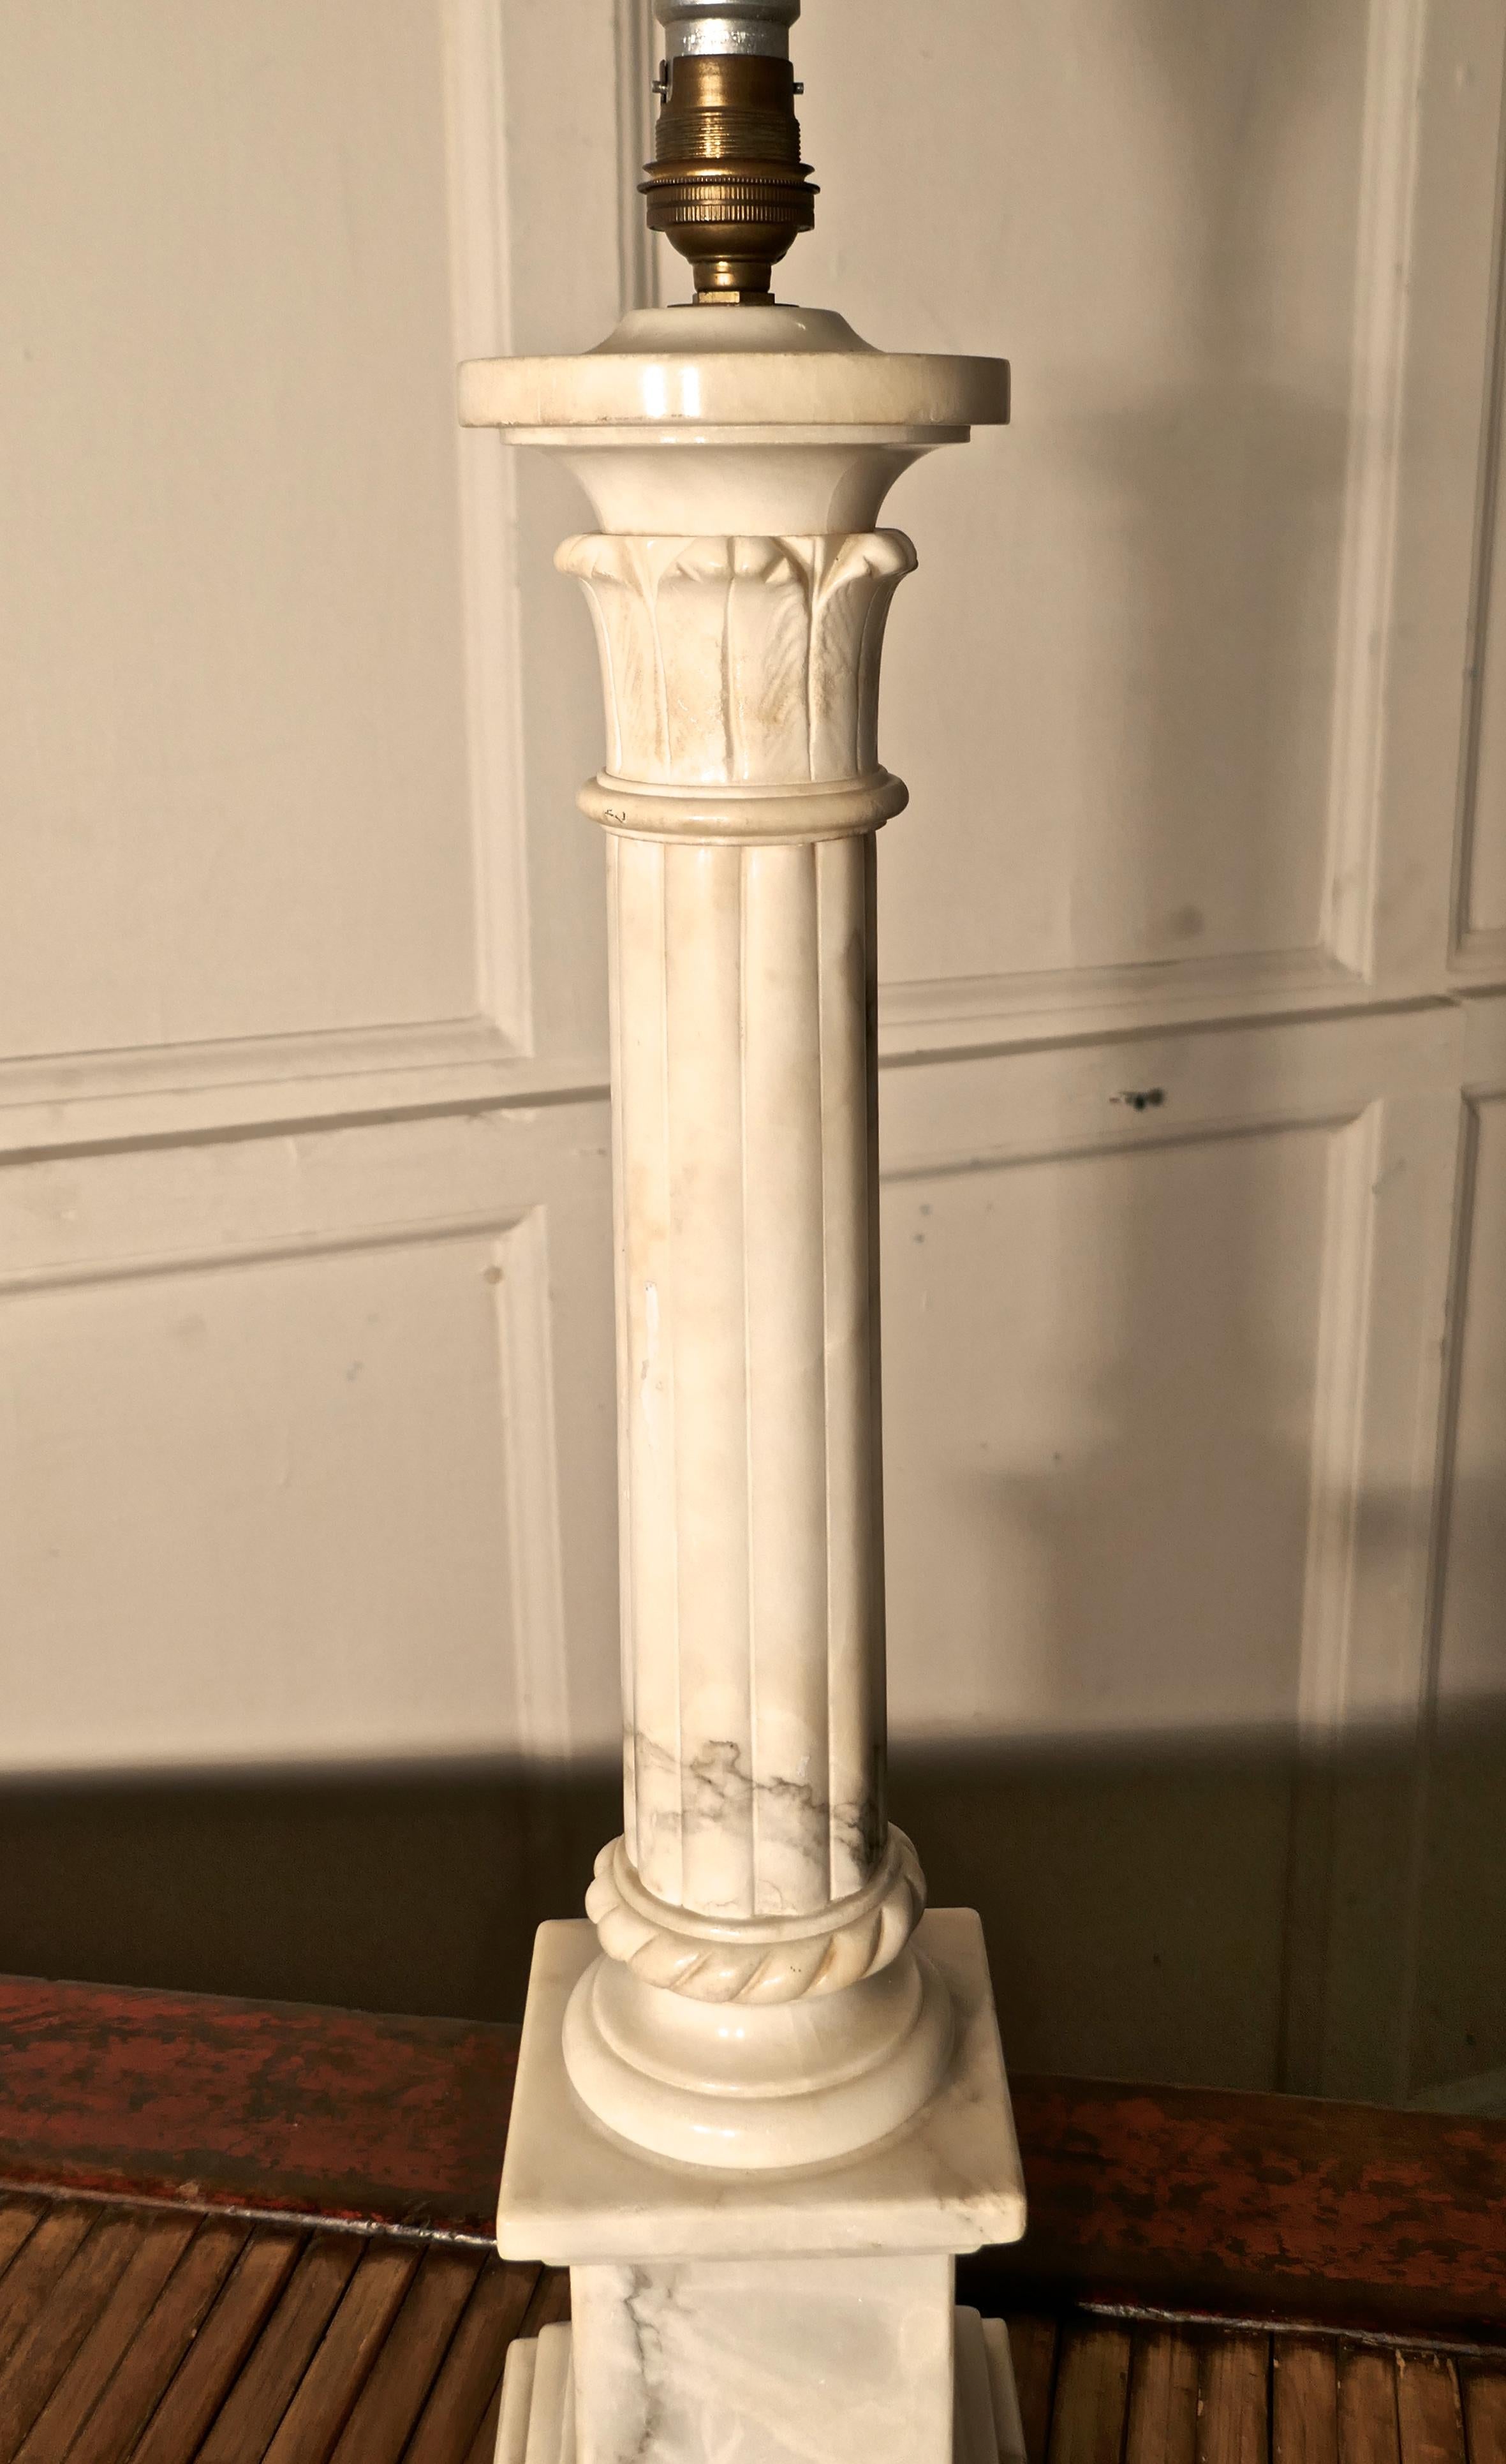 Tall white marble Corinthian column table lamp

This is heavy piece it is made in solid marble, the lamp has a single fluted marble corinthian style columns set on a marble base
This is a very attractive piece larger than most and heavy the